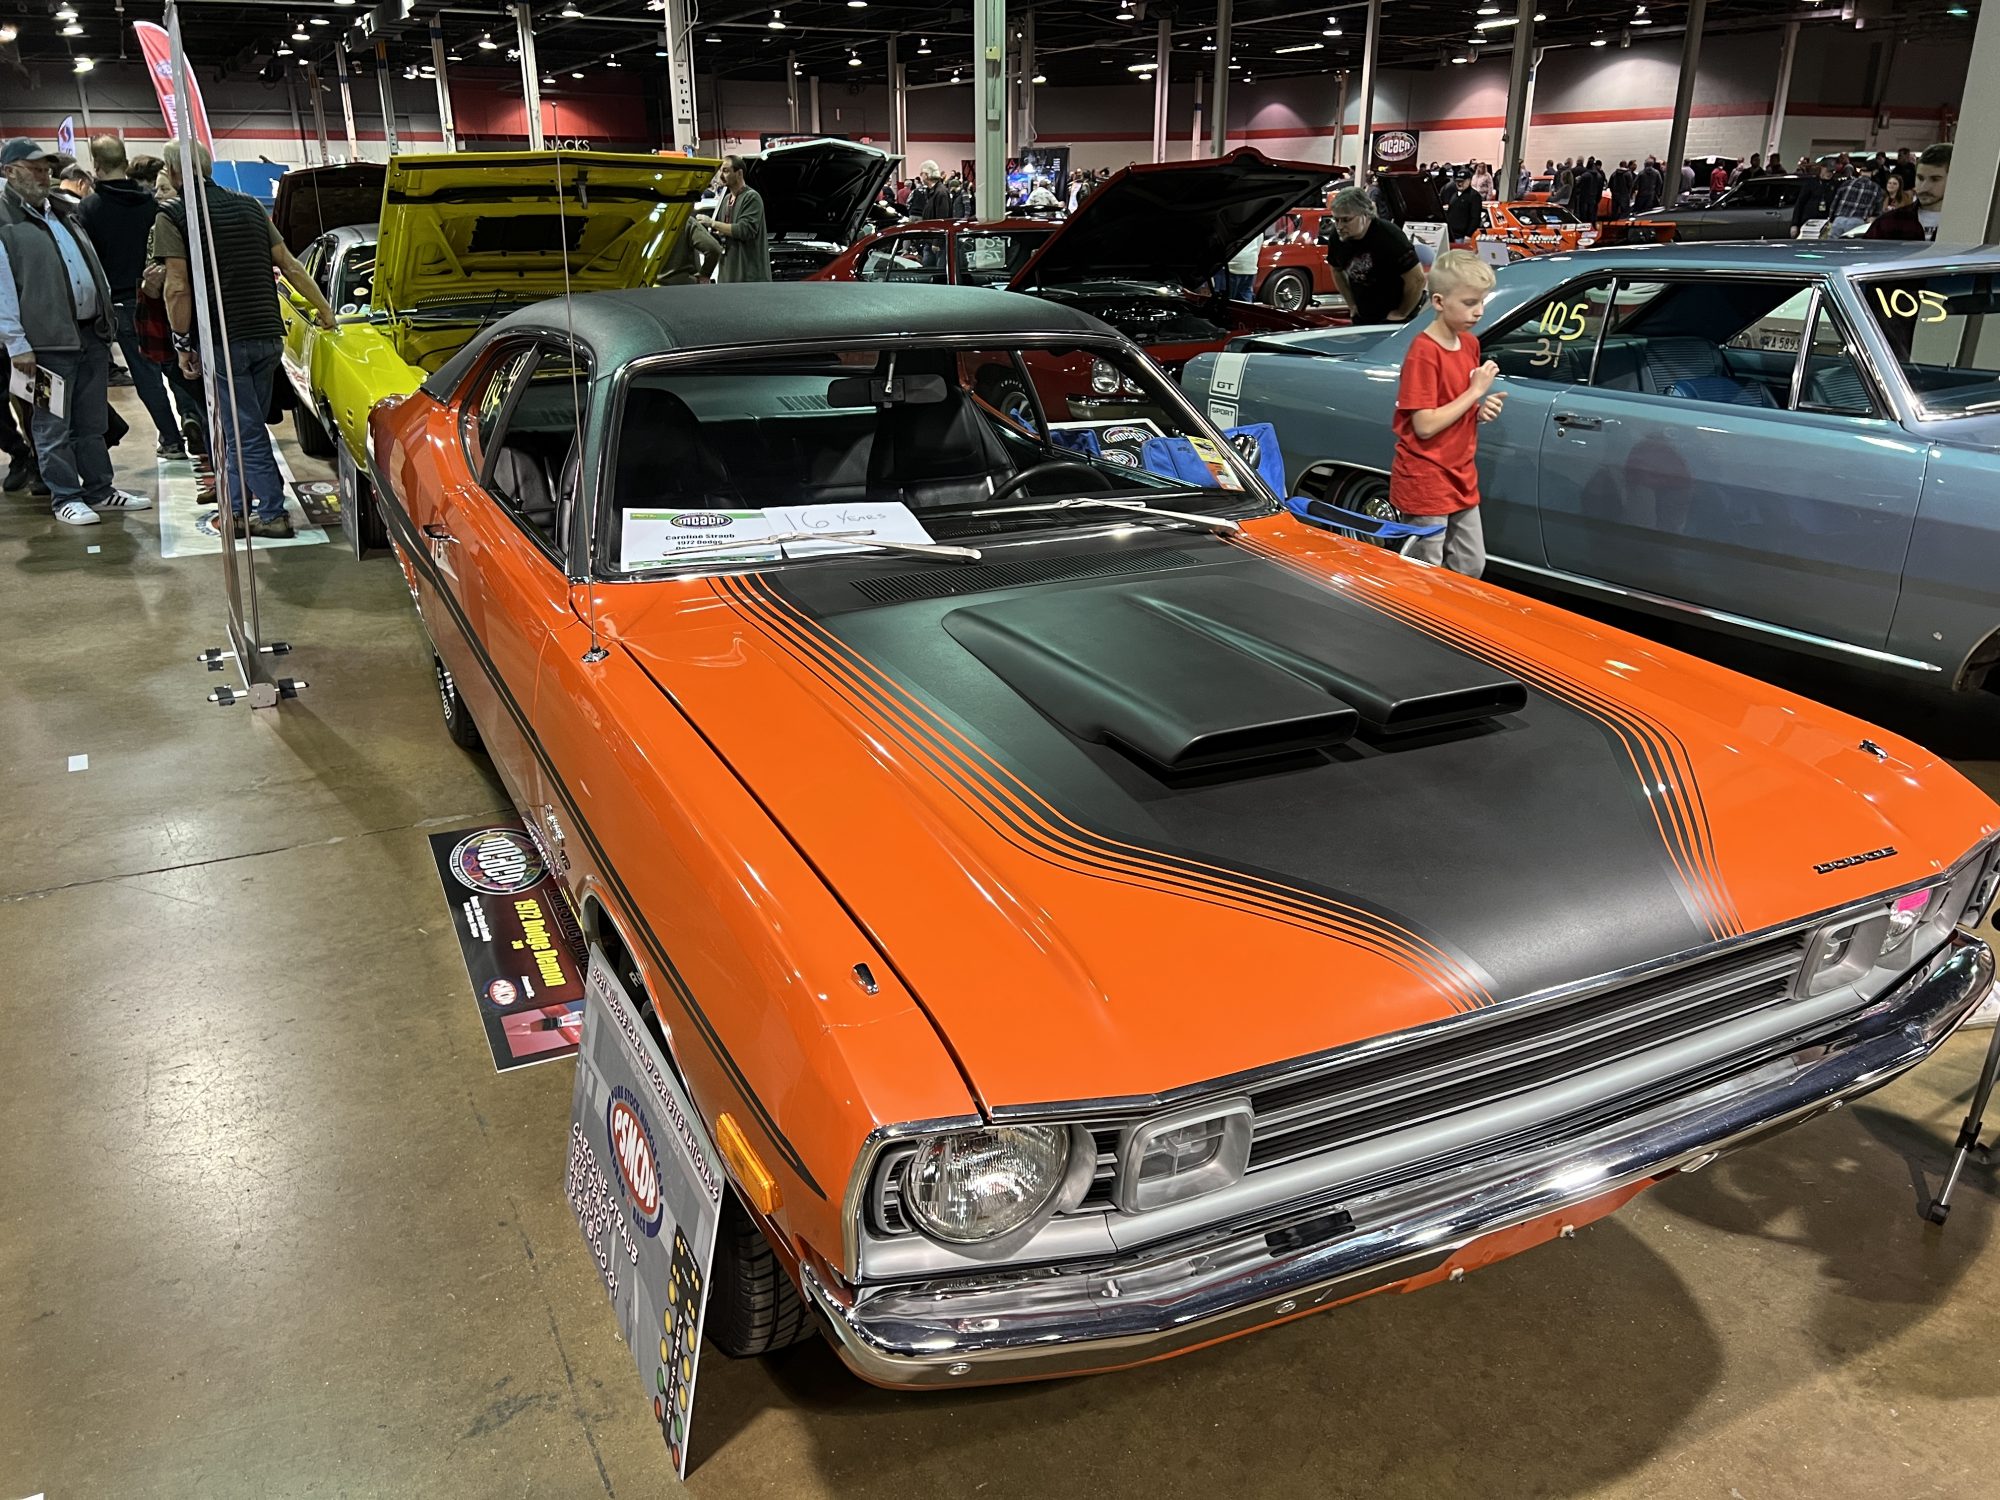 Throaty rumble of today's muscle cars is a sham – The Denver Post